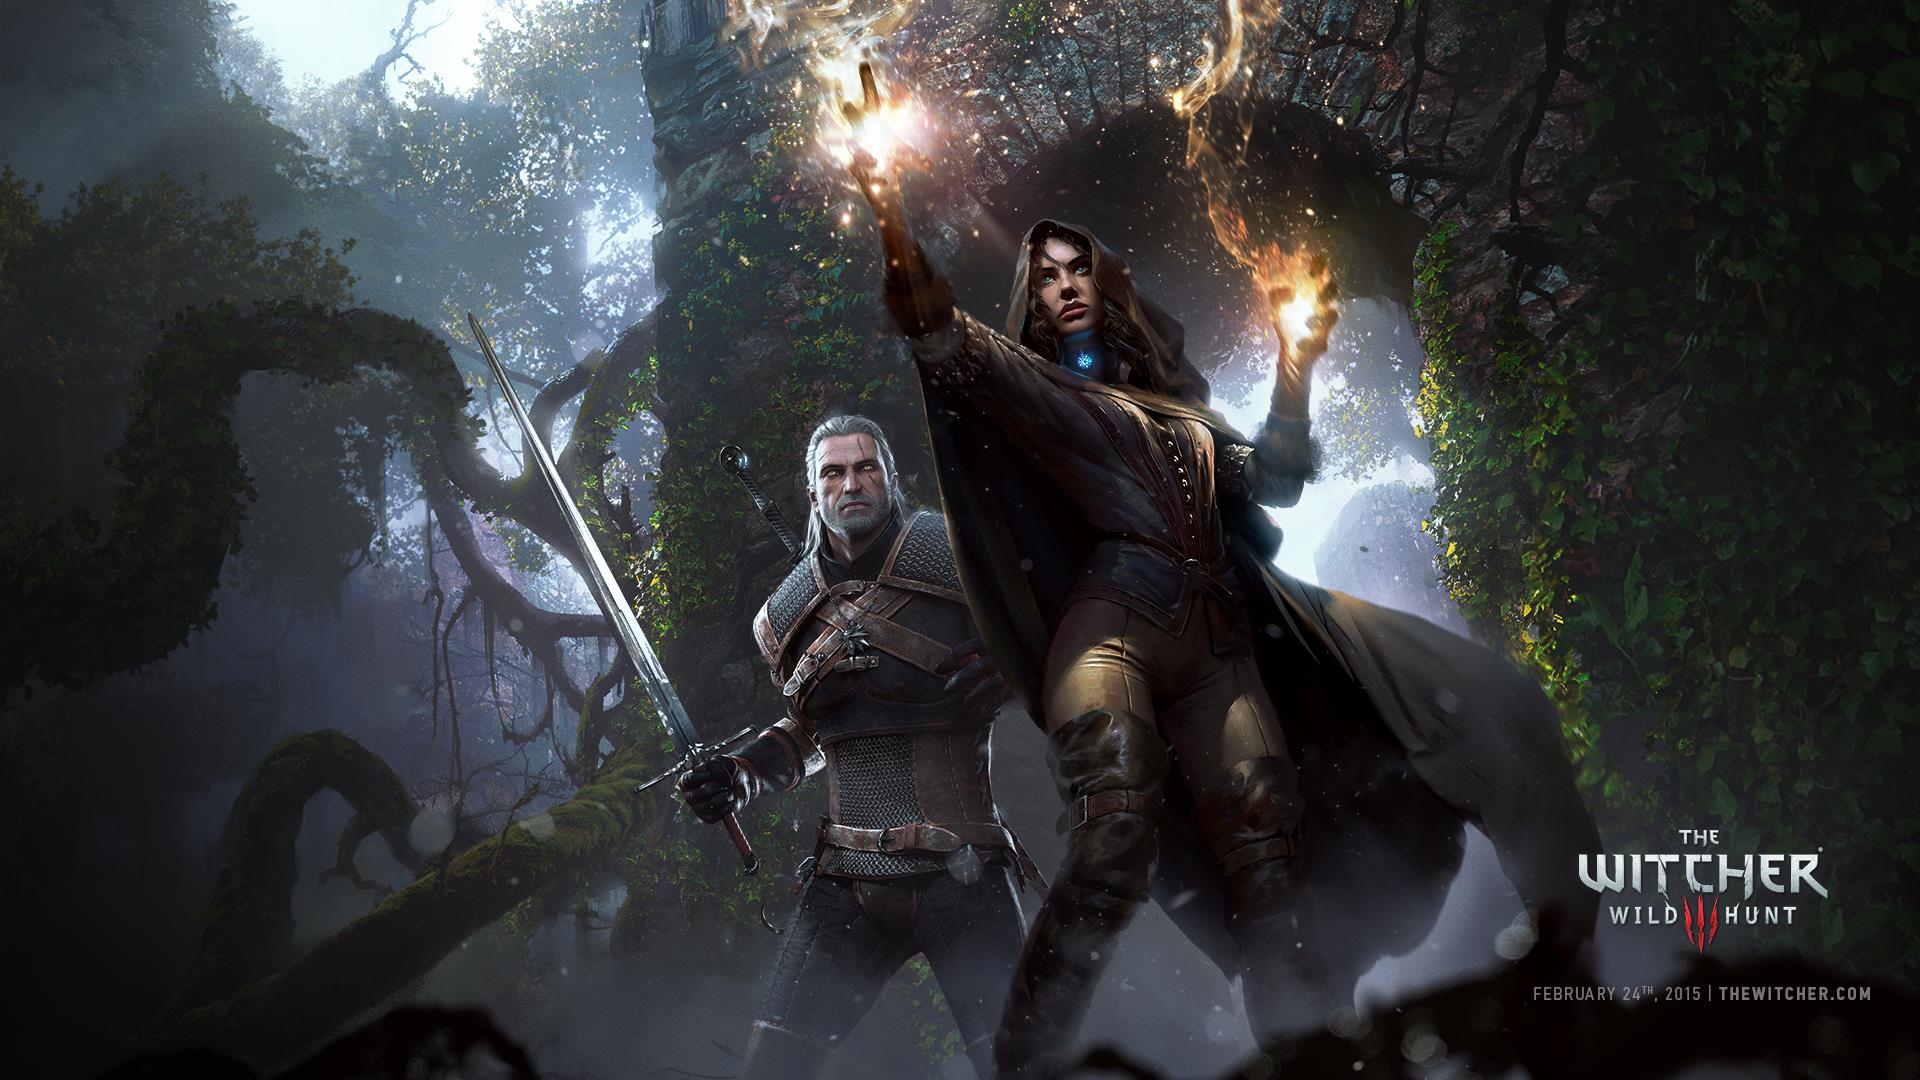 The Witcher 3 Wild Hunt will be available on PC PlayStation 4 and 1920x1080